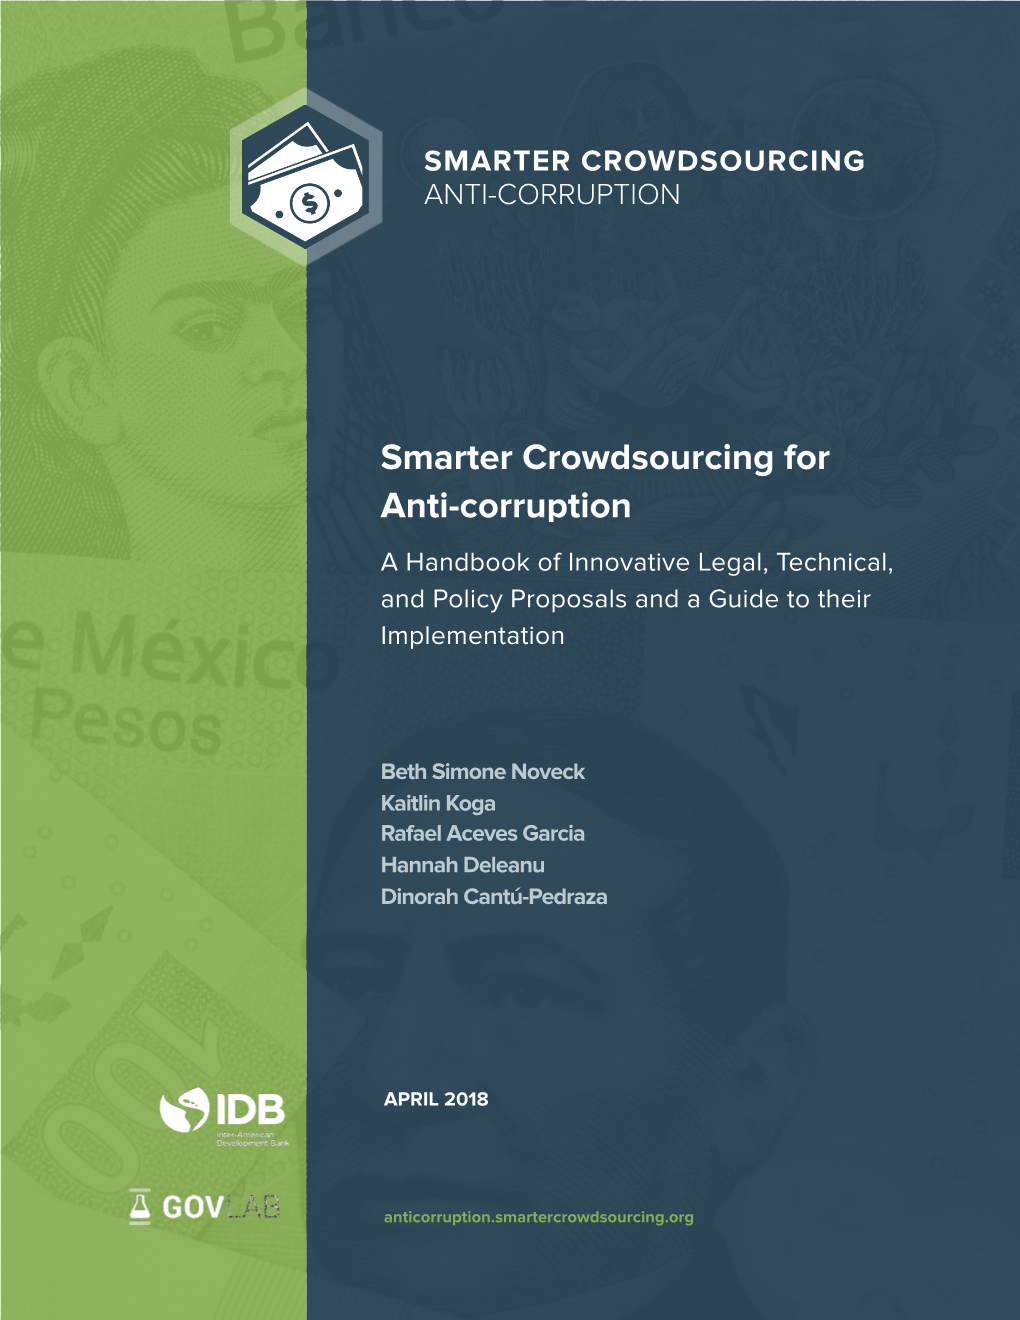 Smarter Crowdsourcing for Anti-Corruption a Handbook of Innovative Legal, Technical, and Policy Proposals and a Guide to Their Implementation